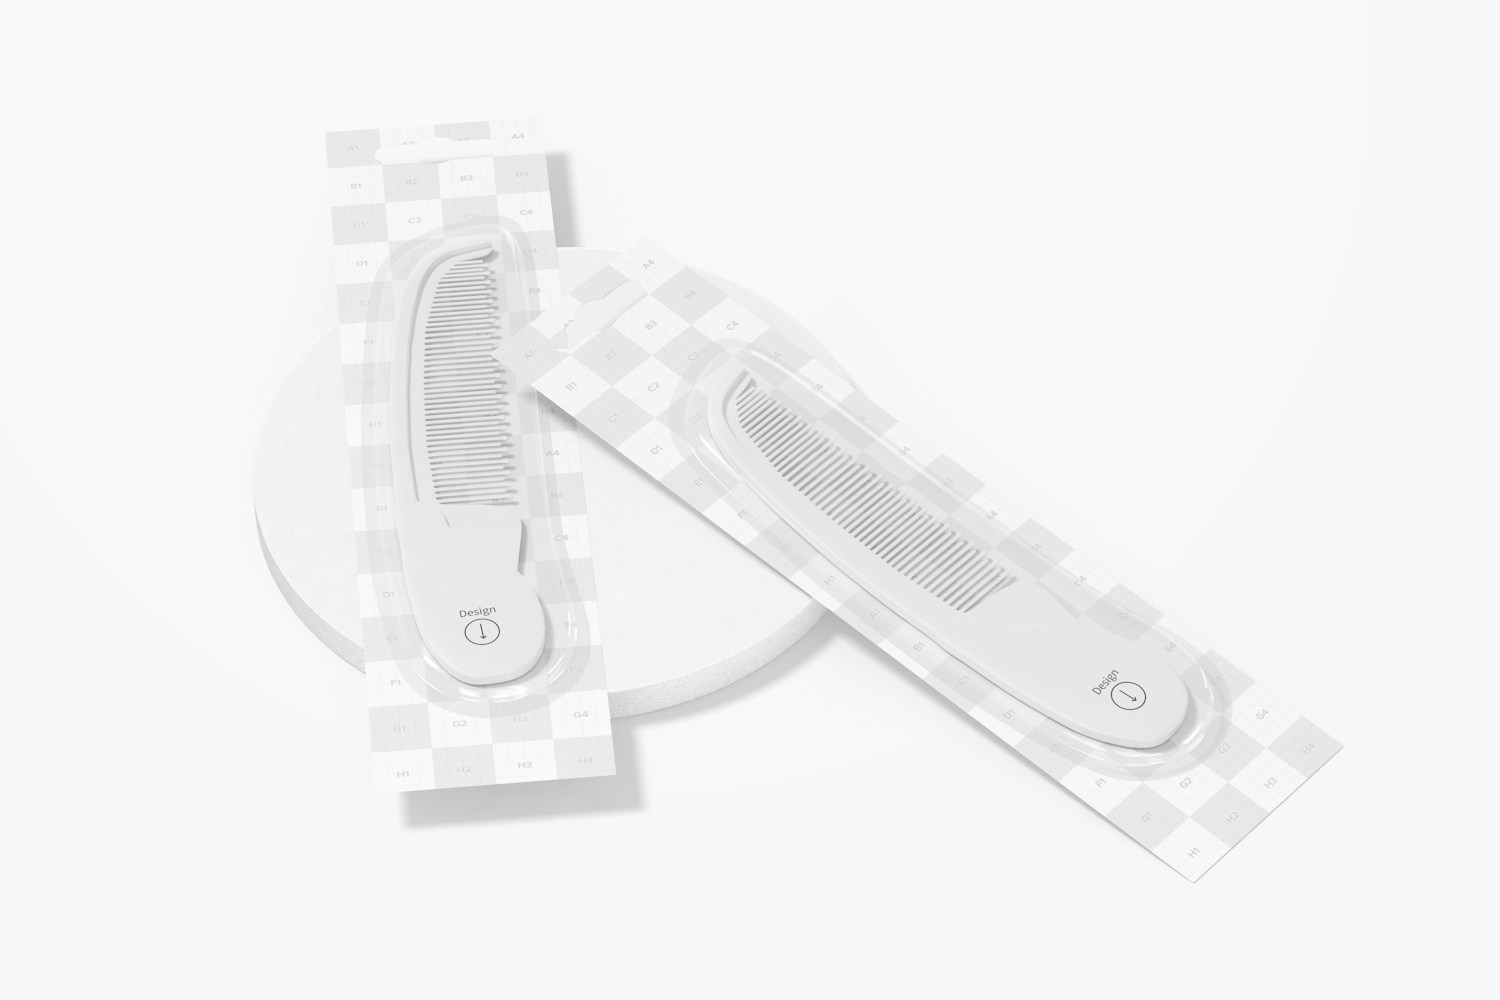 Baby Comb Blister Mockup, Perspective